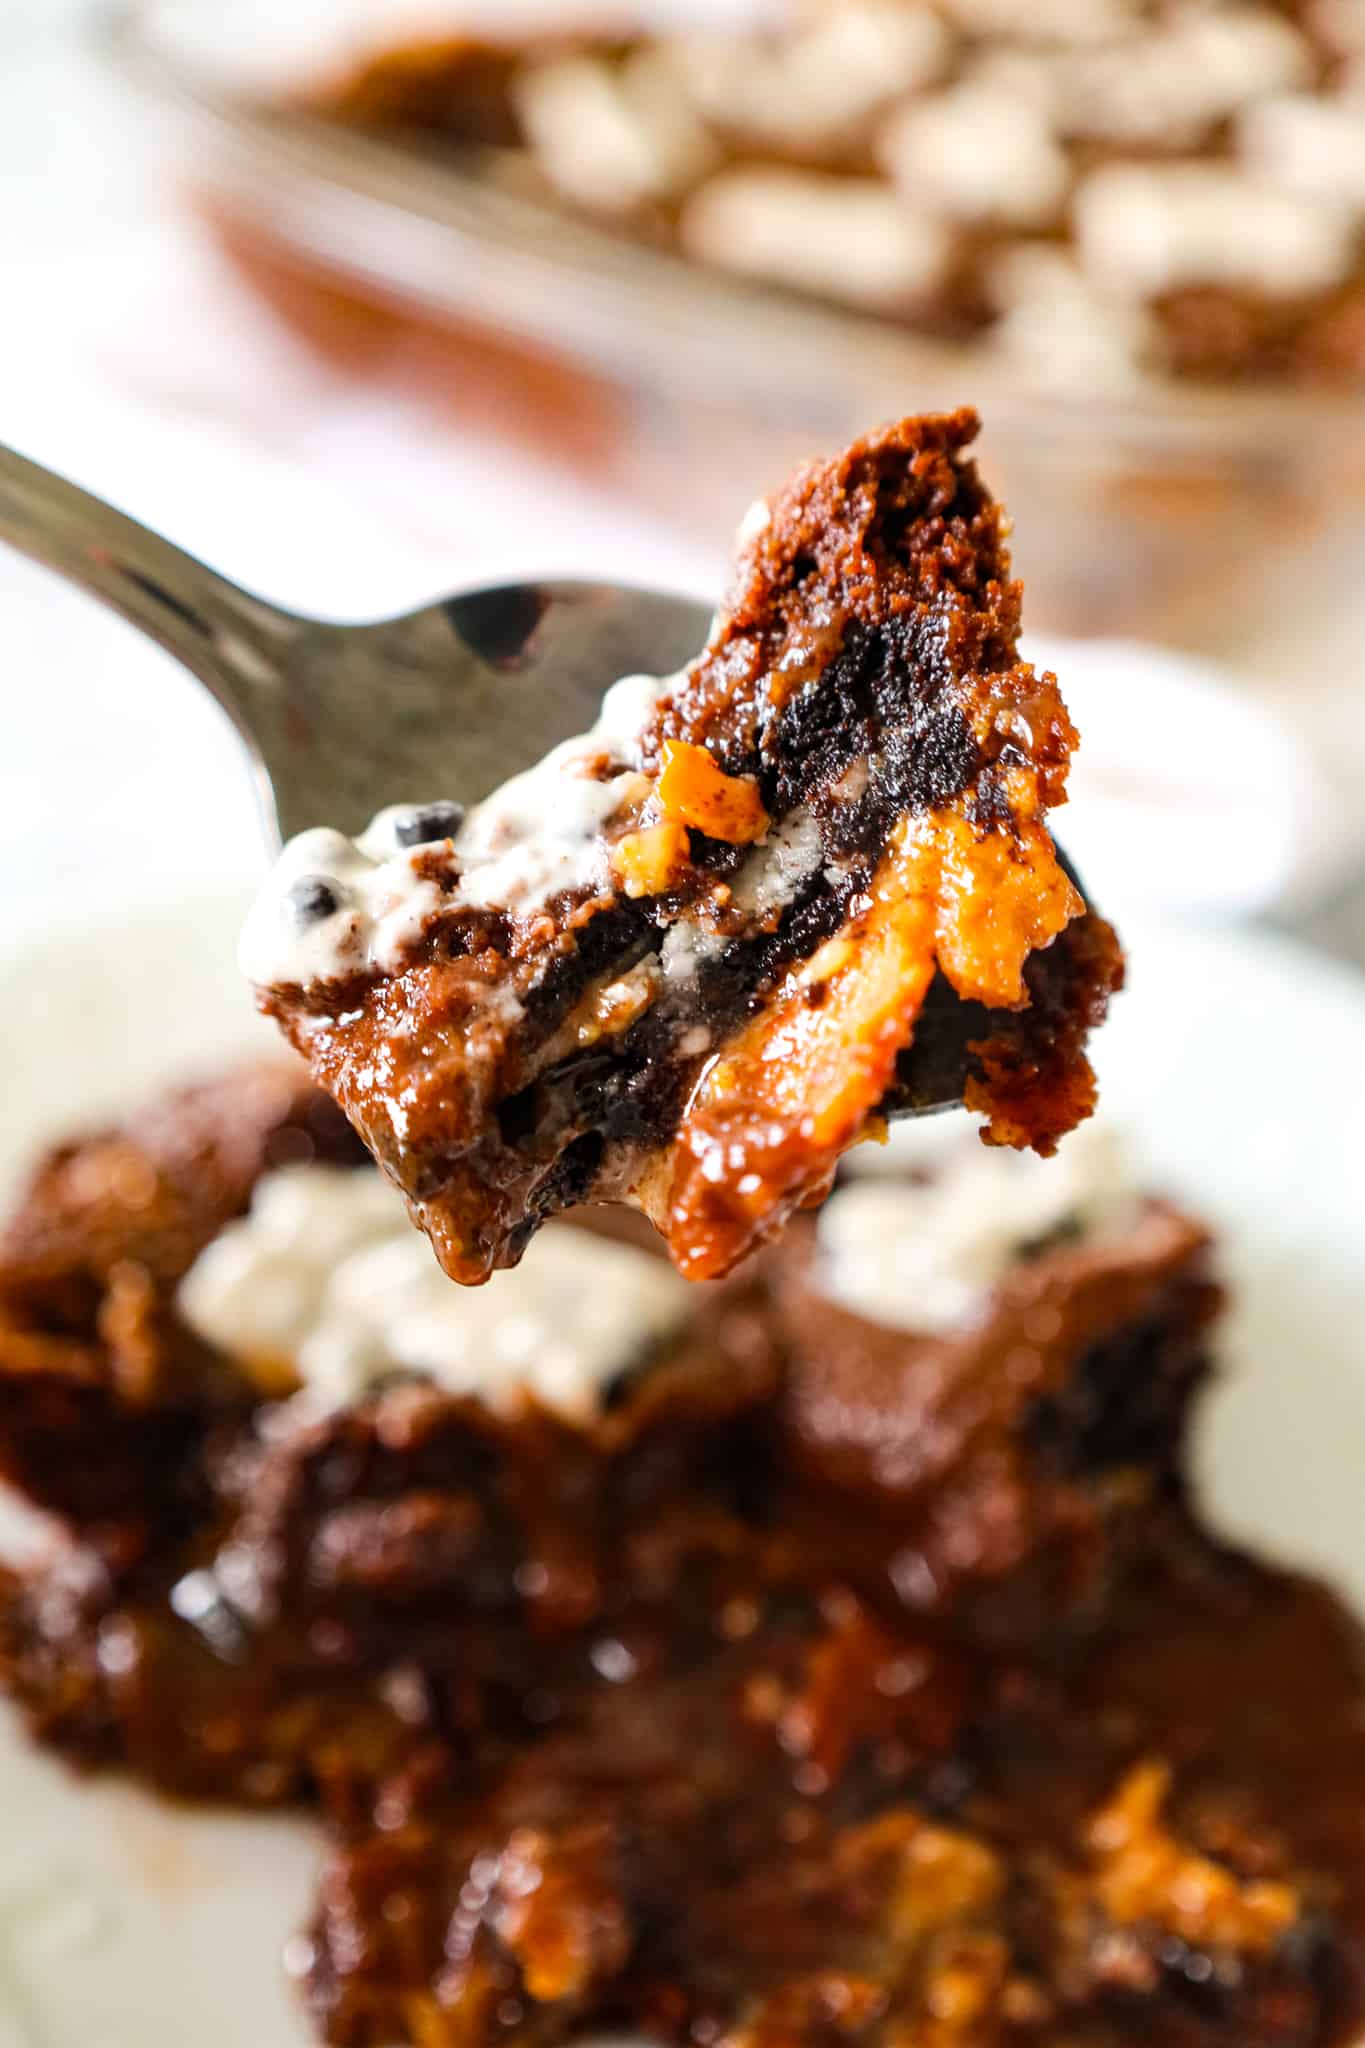 Oreo Dump Cake is an easy and decadent dessert recipe using Oreo cookies, white frosting, chocolate cake mix, sweetened condensed milk and butter.